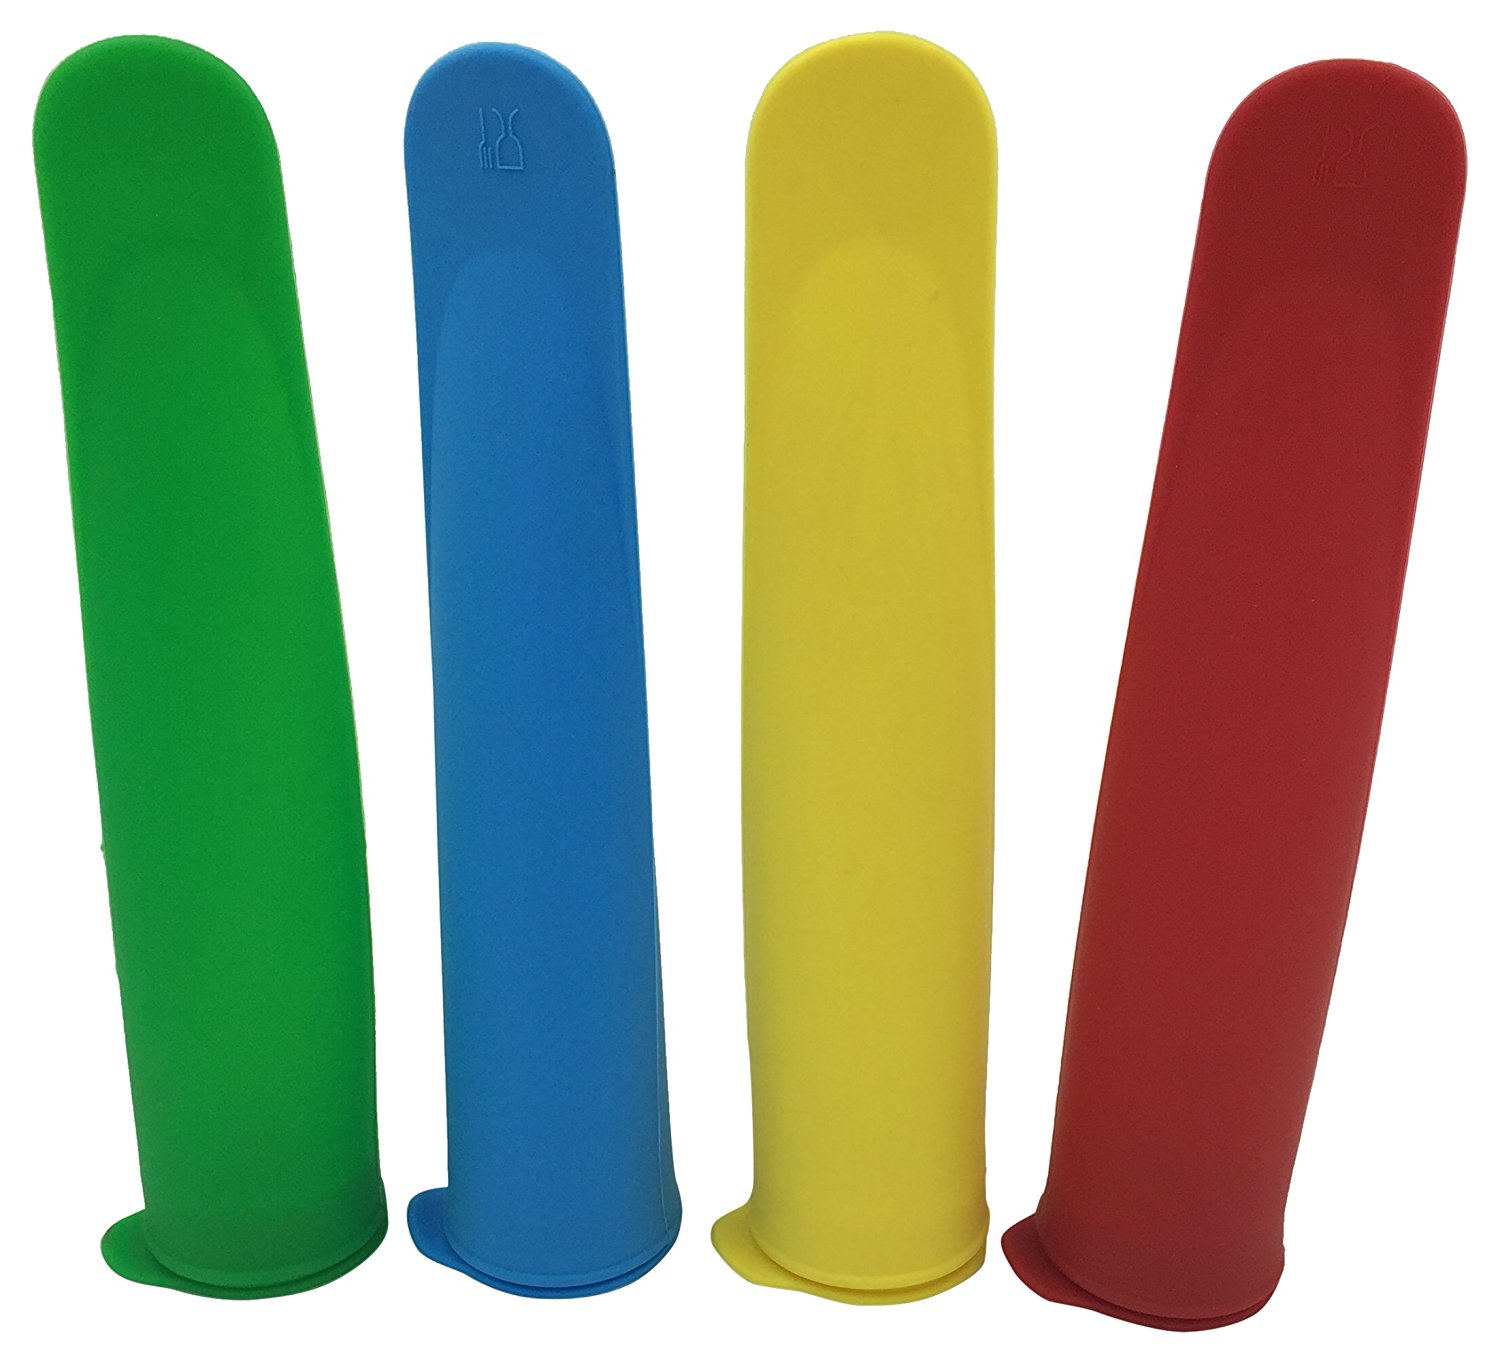 Homemaker Silicone Popsicle Molds, 4 Piece